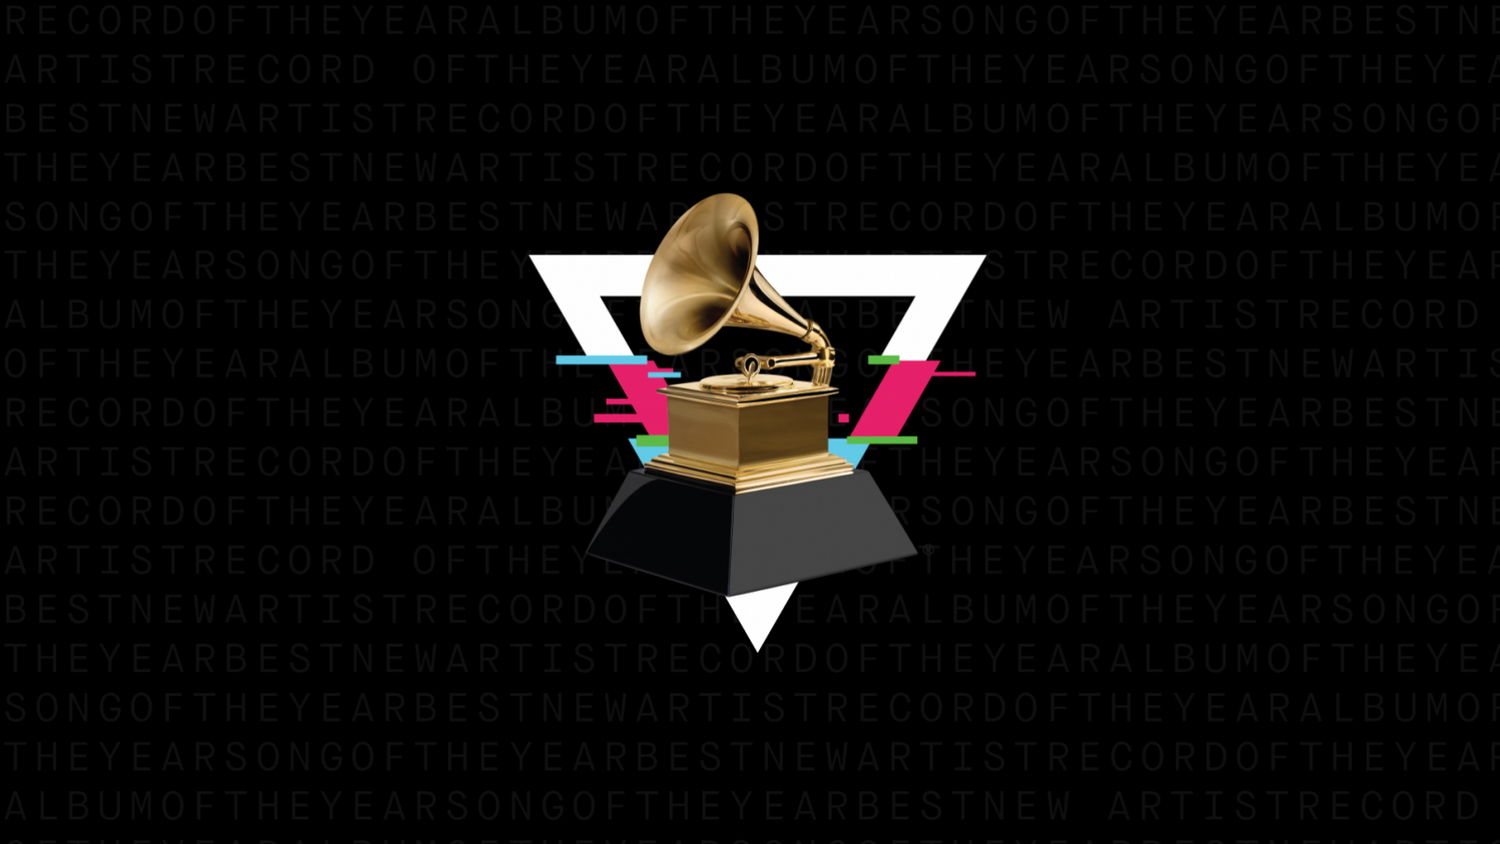 The 63rd annual Grammy Awards have been pushed back due to concerns over Covid-19